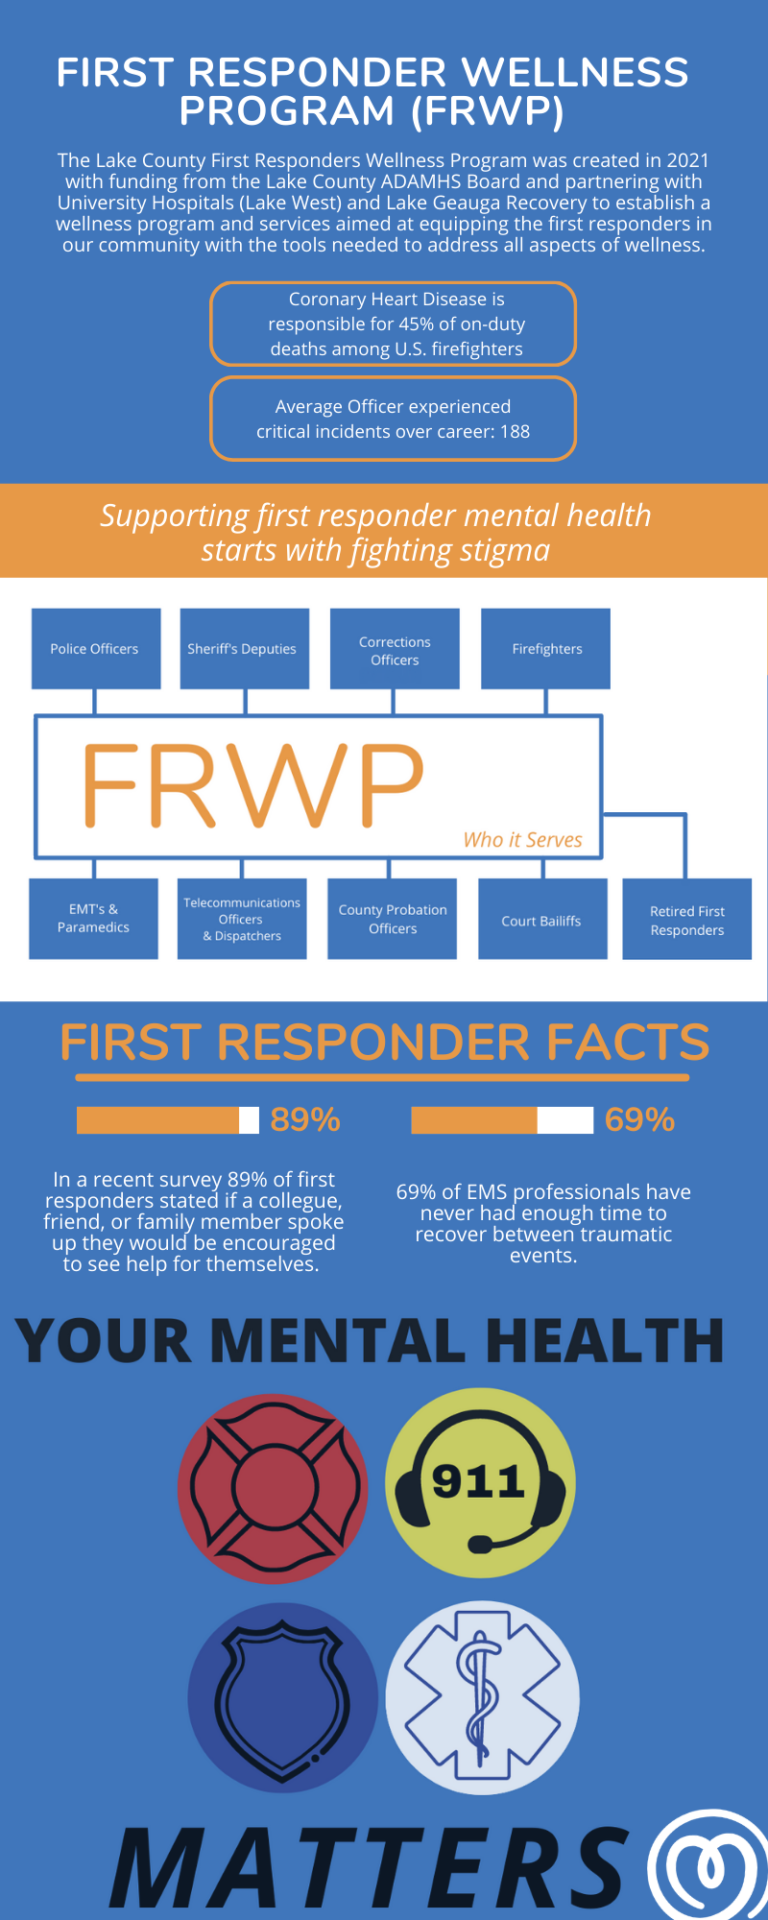 Home - BC First Responders' Mental Health